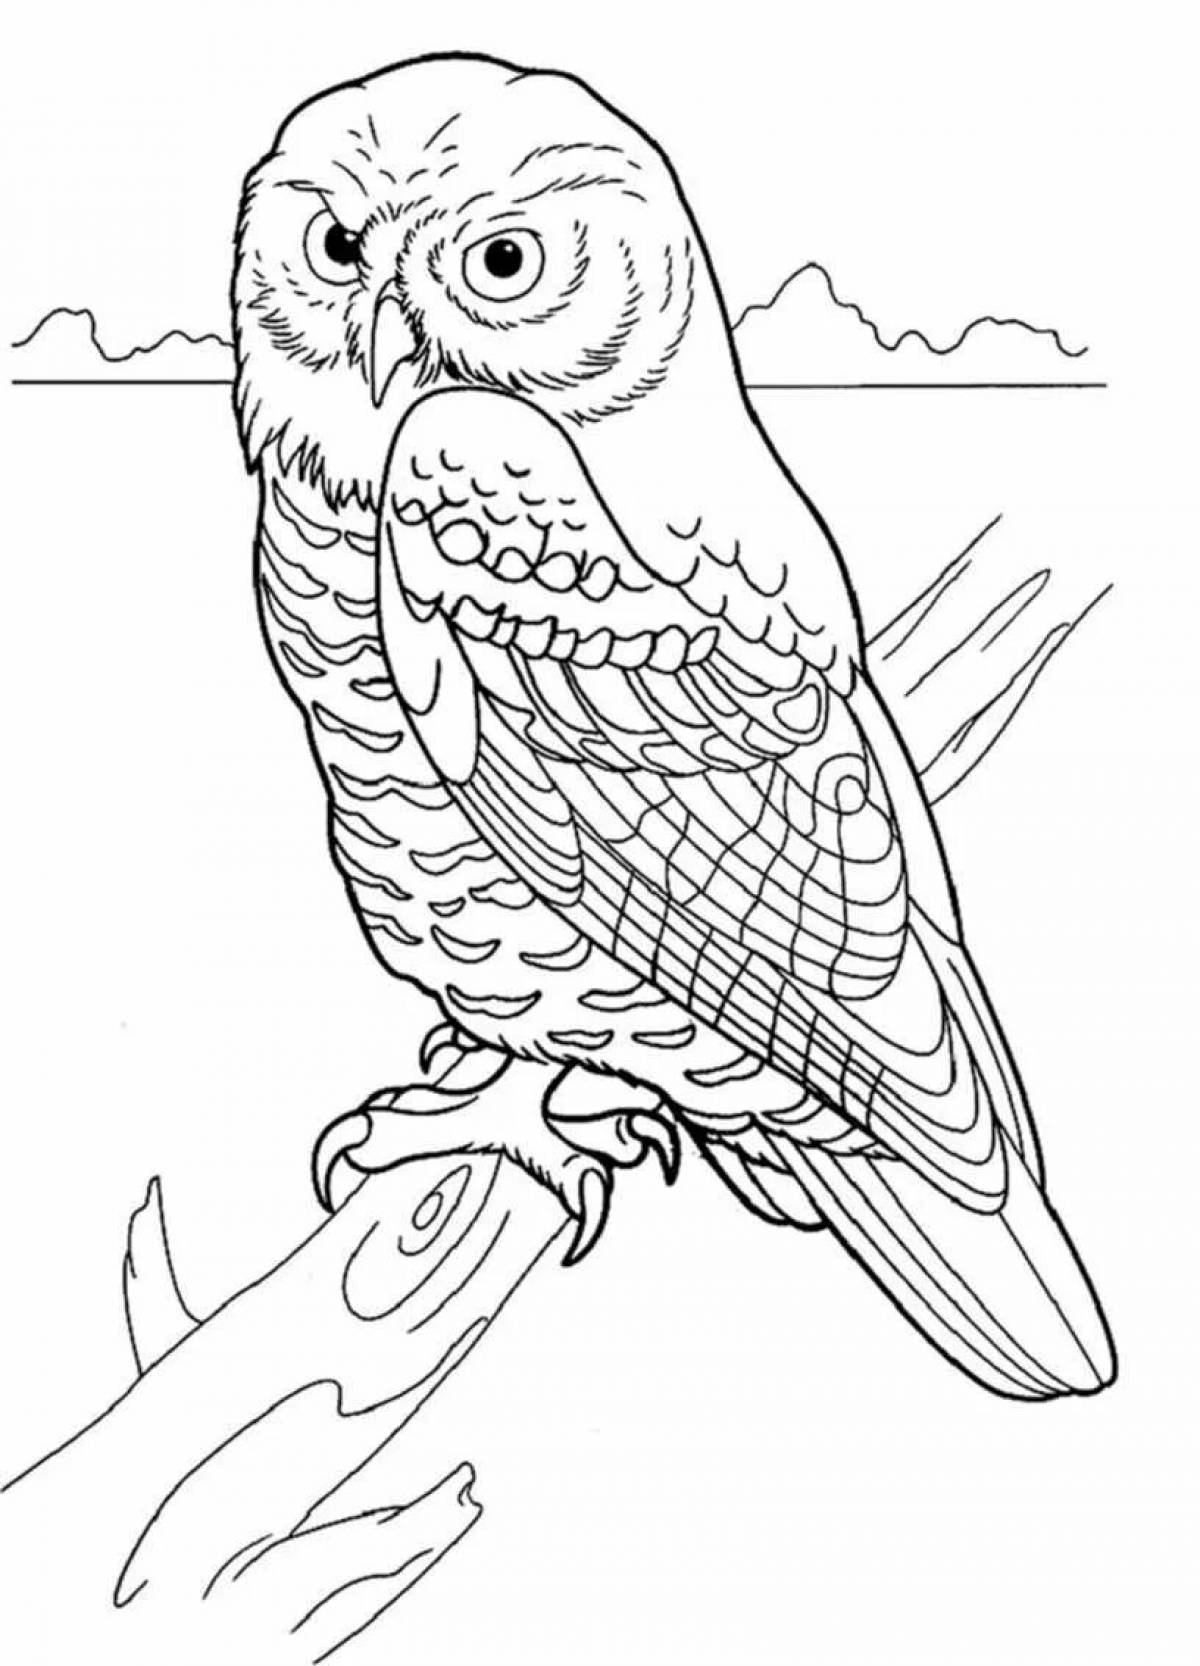 A funny snowy owl coloring book for kids